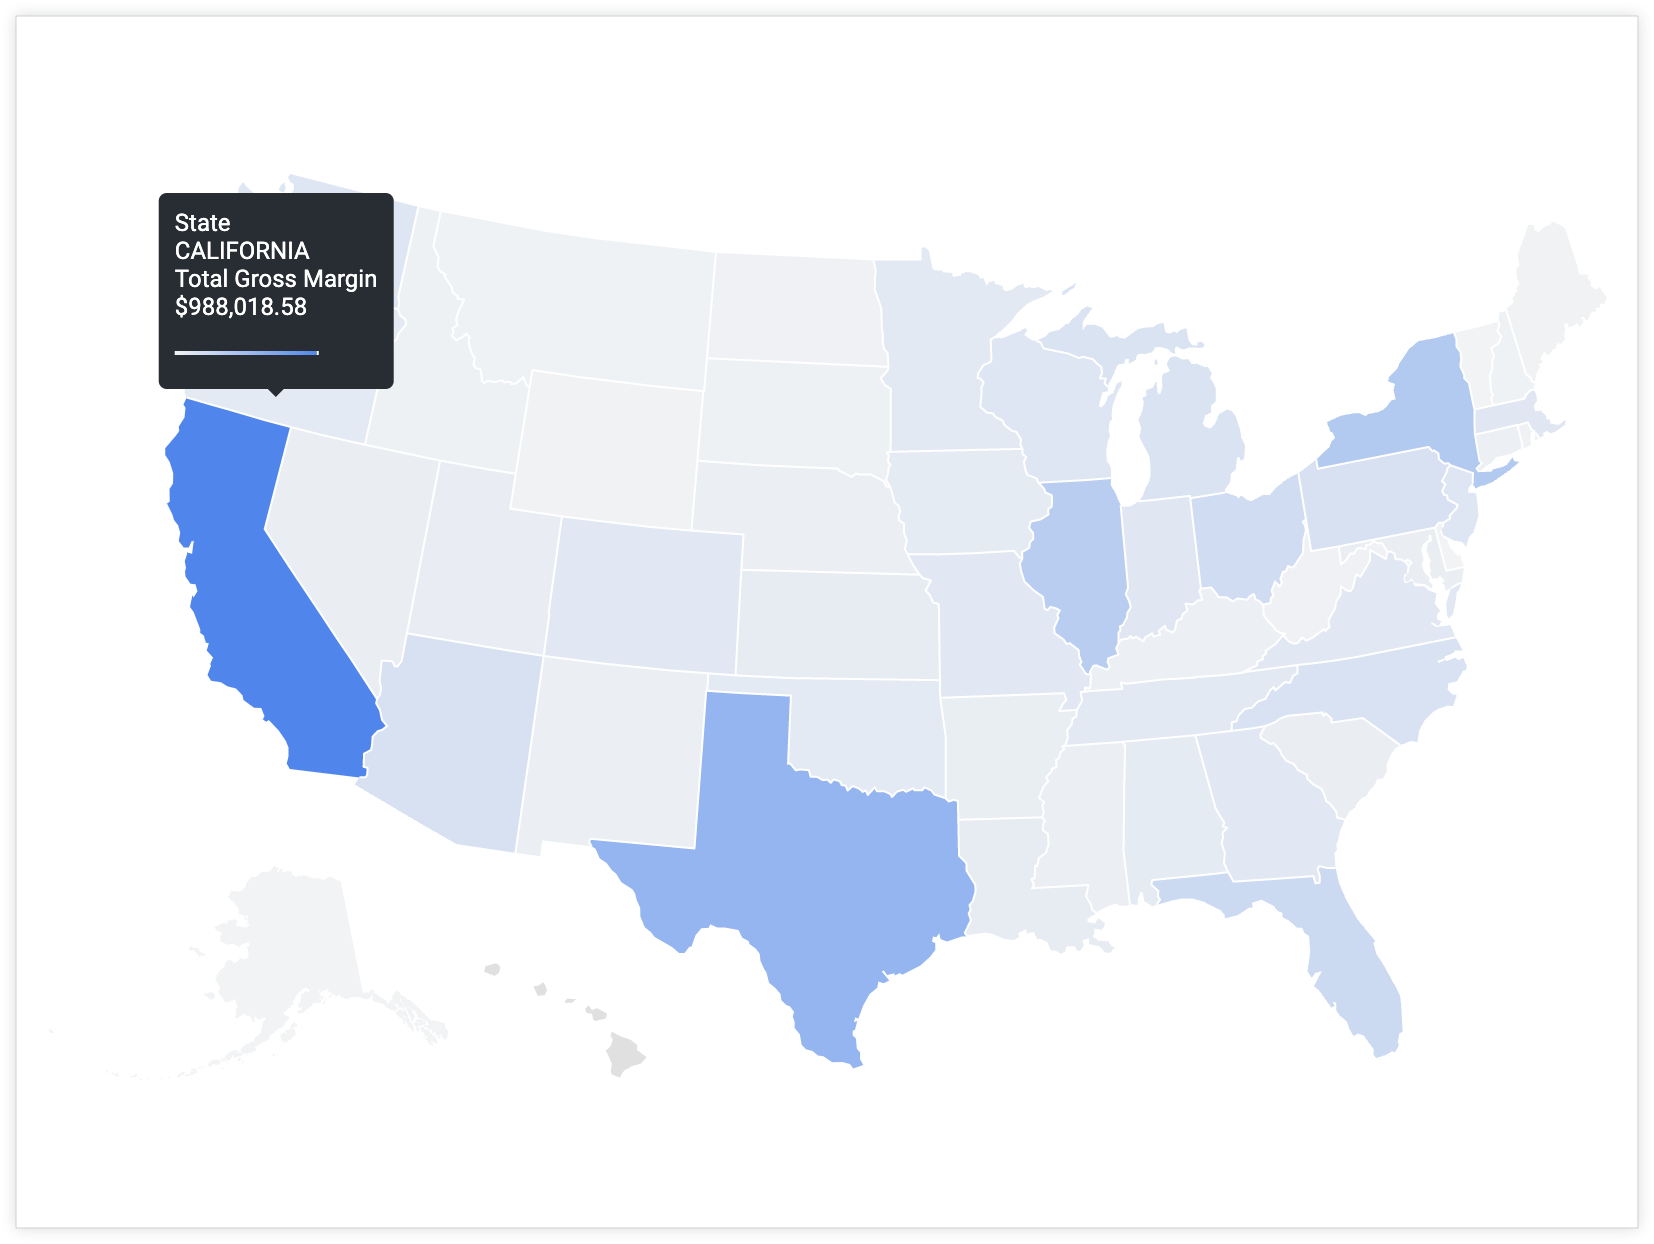 When a user hovers their cursor over California, a tooltip is displayed with the State value California and the Total Gross Margin value $988,018.58.